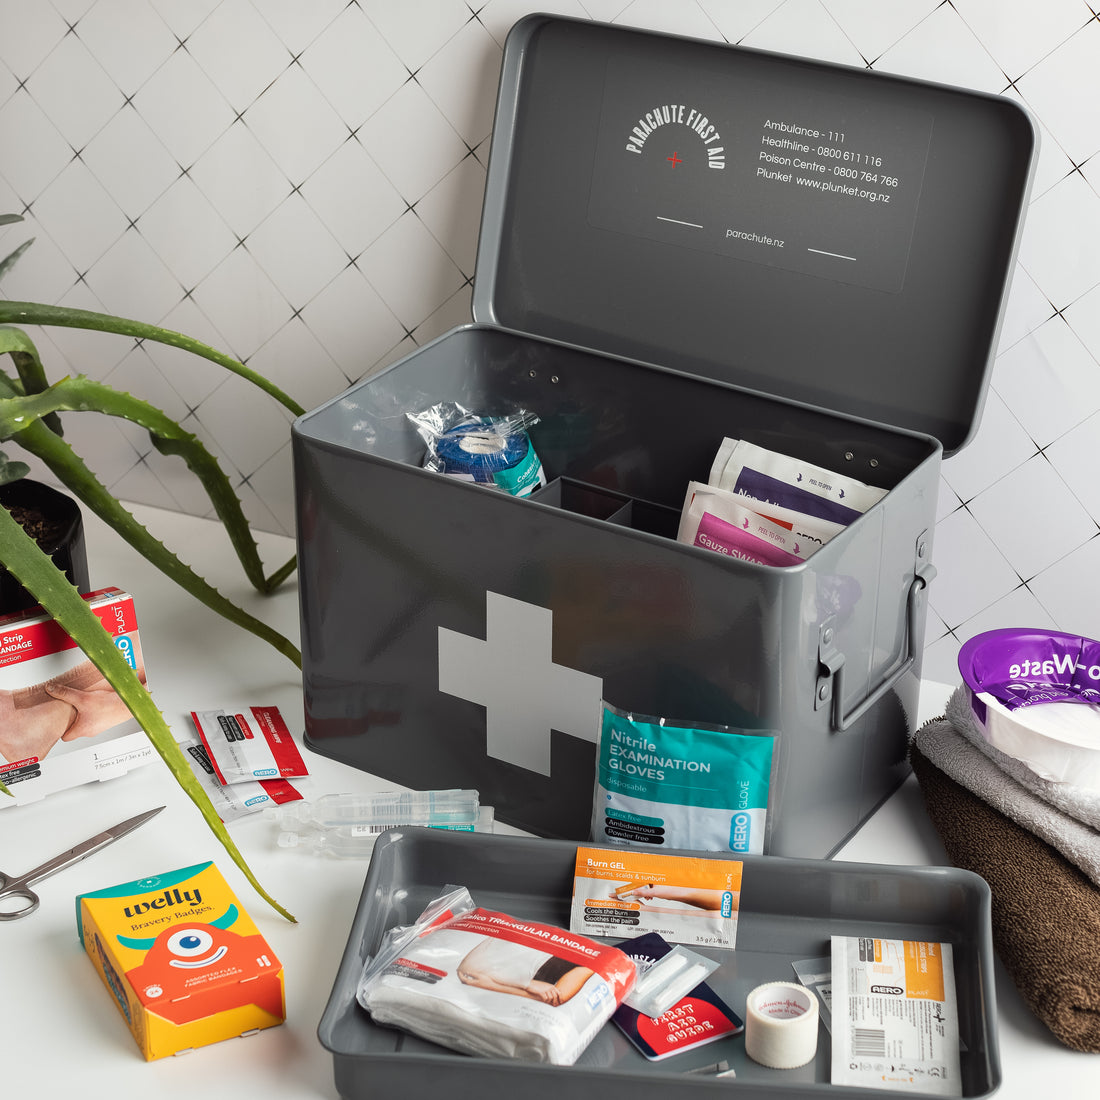 Recommended Medications to Keep at Home in your First Aid Kit